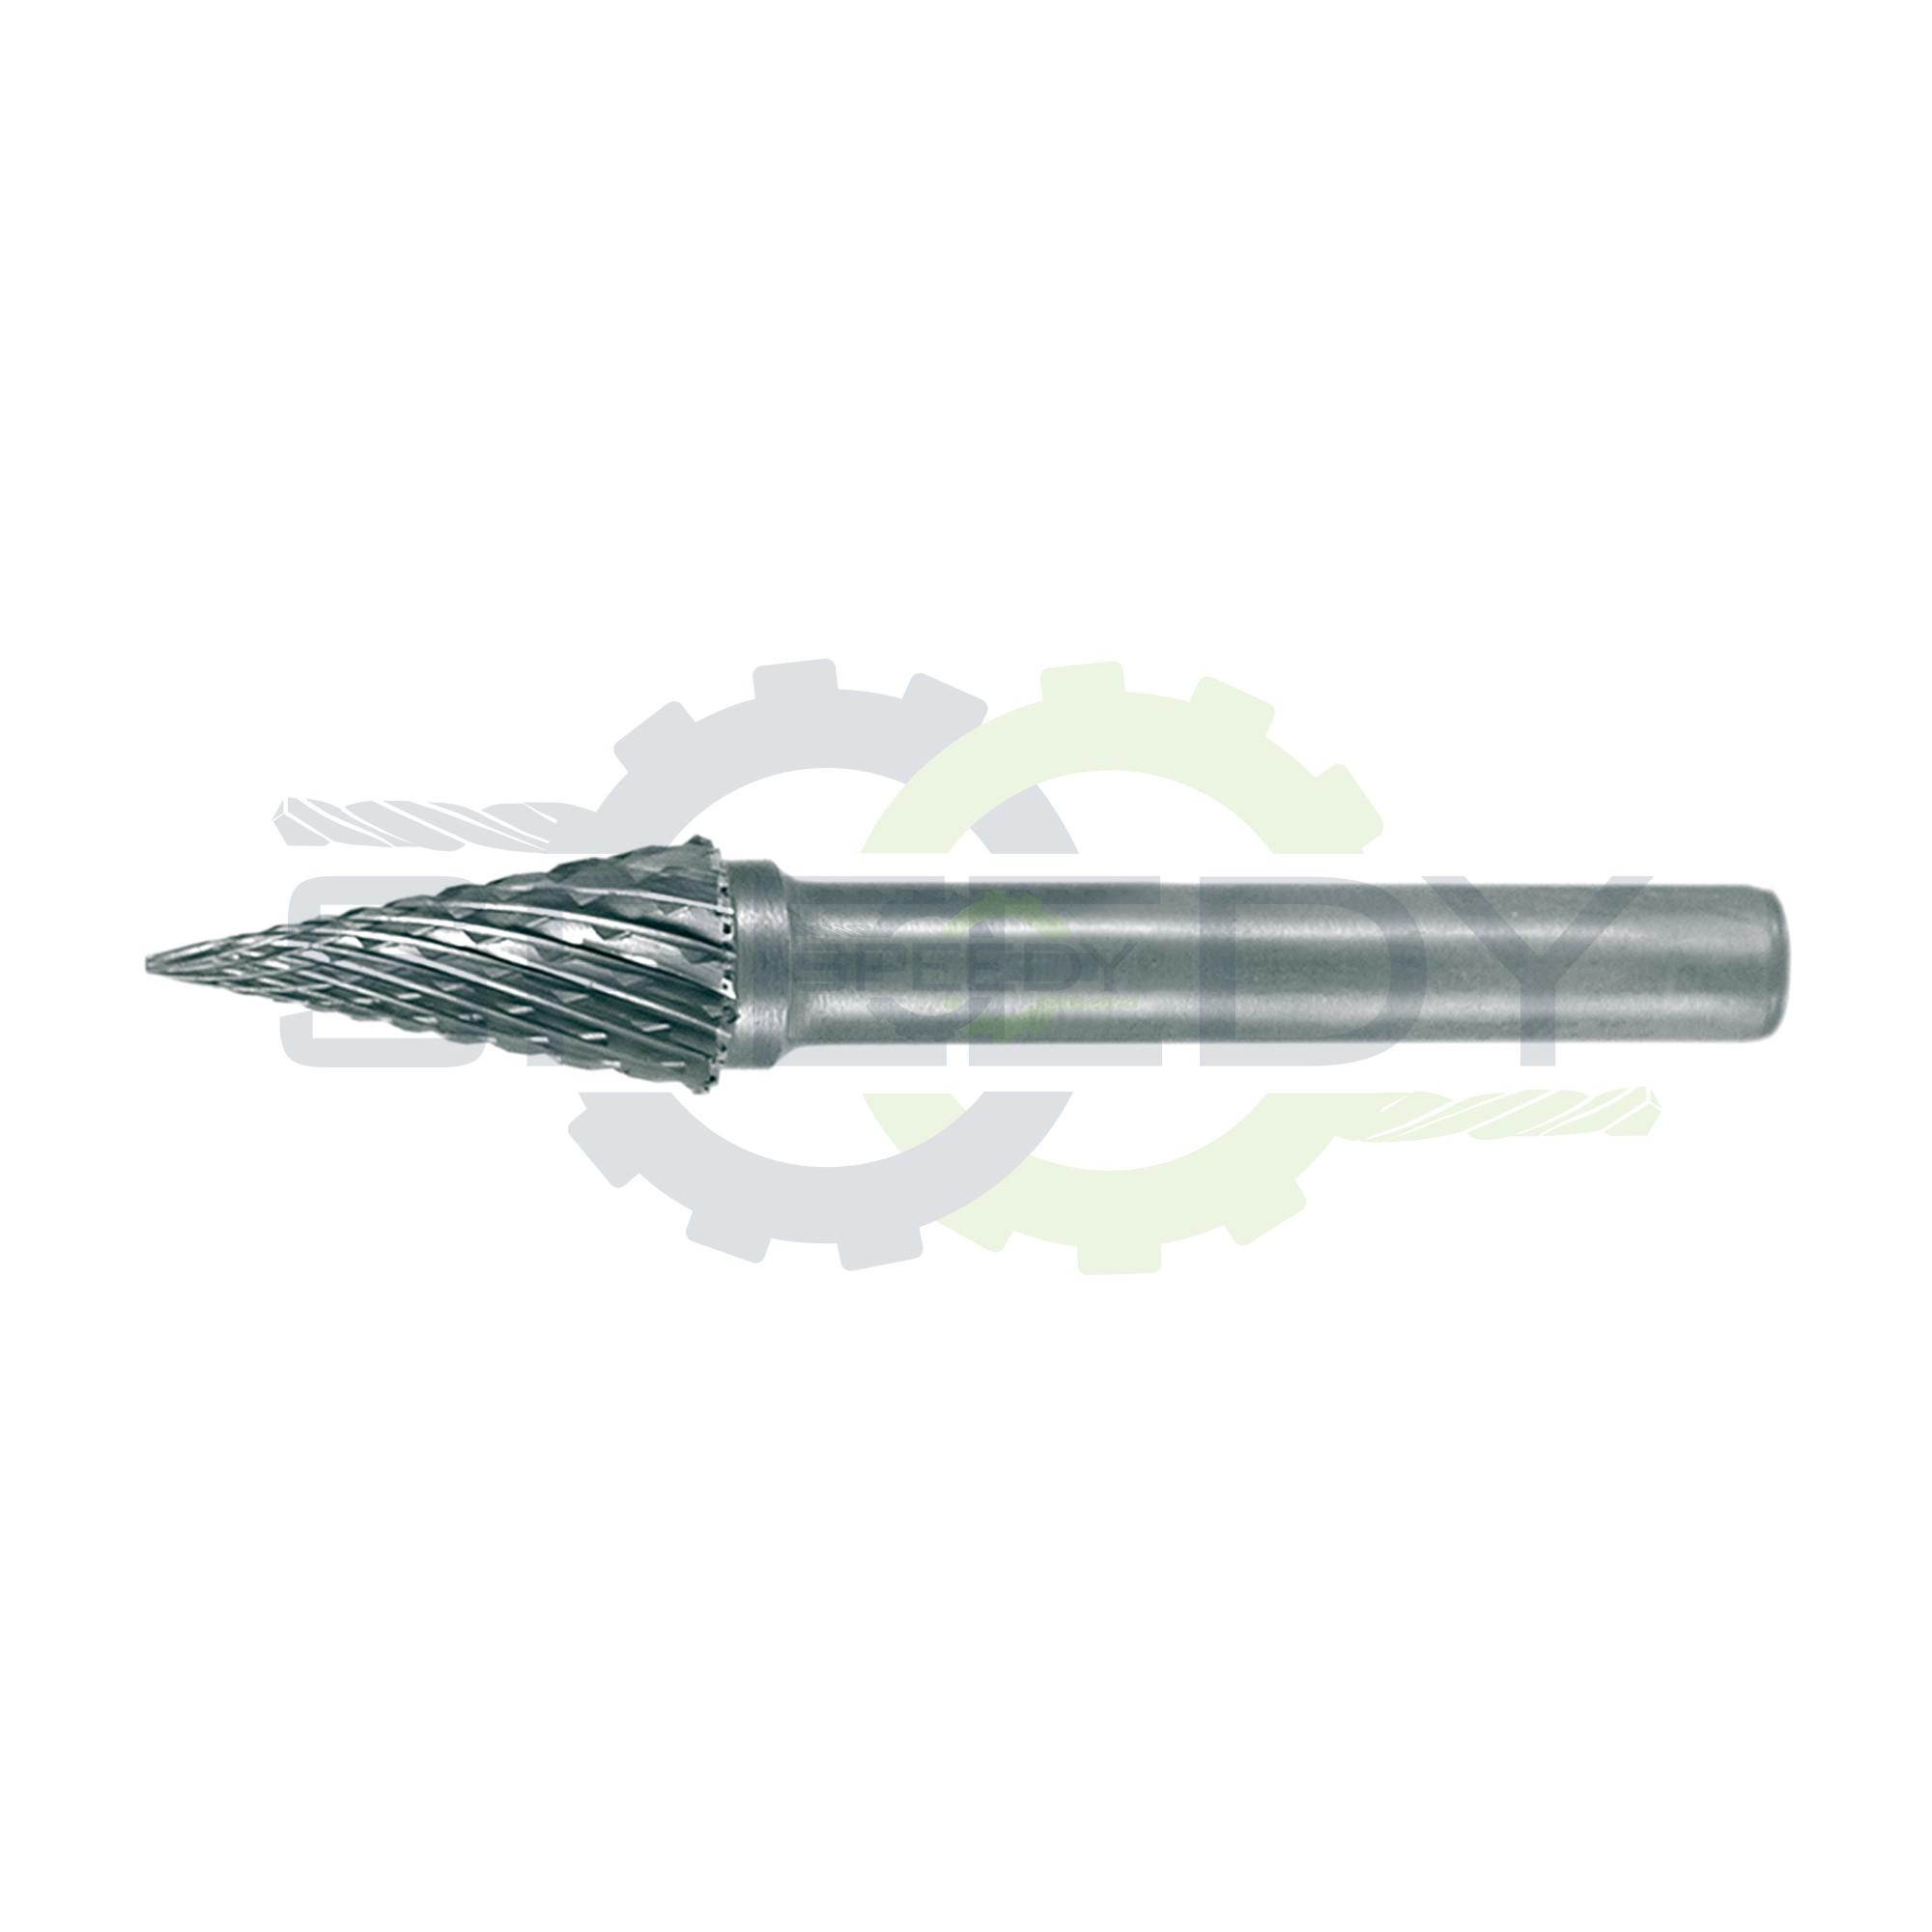 Rotary burrs type M-Conical Point 